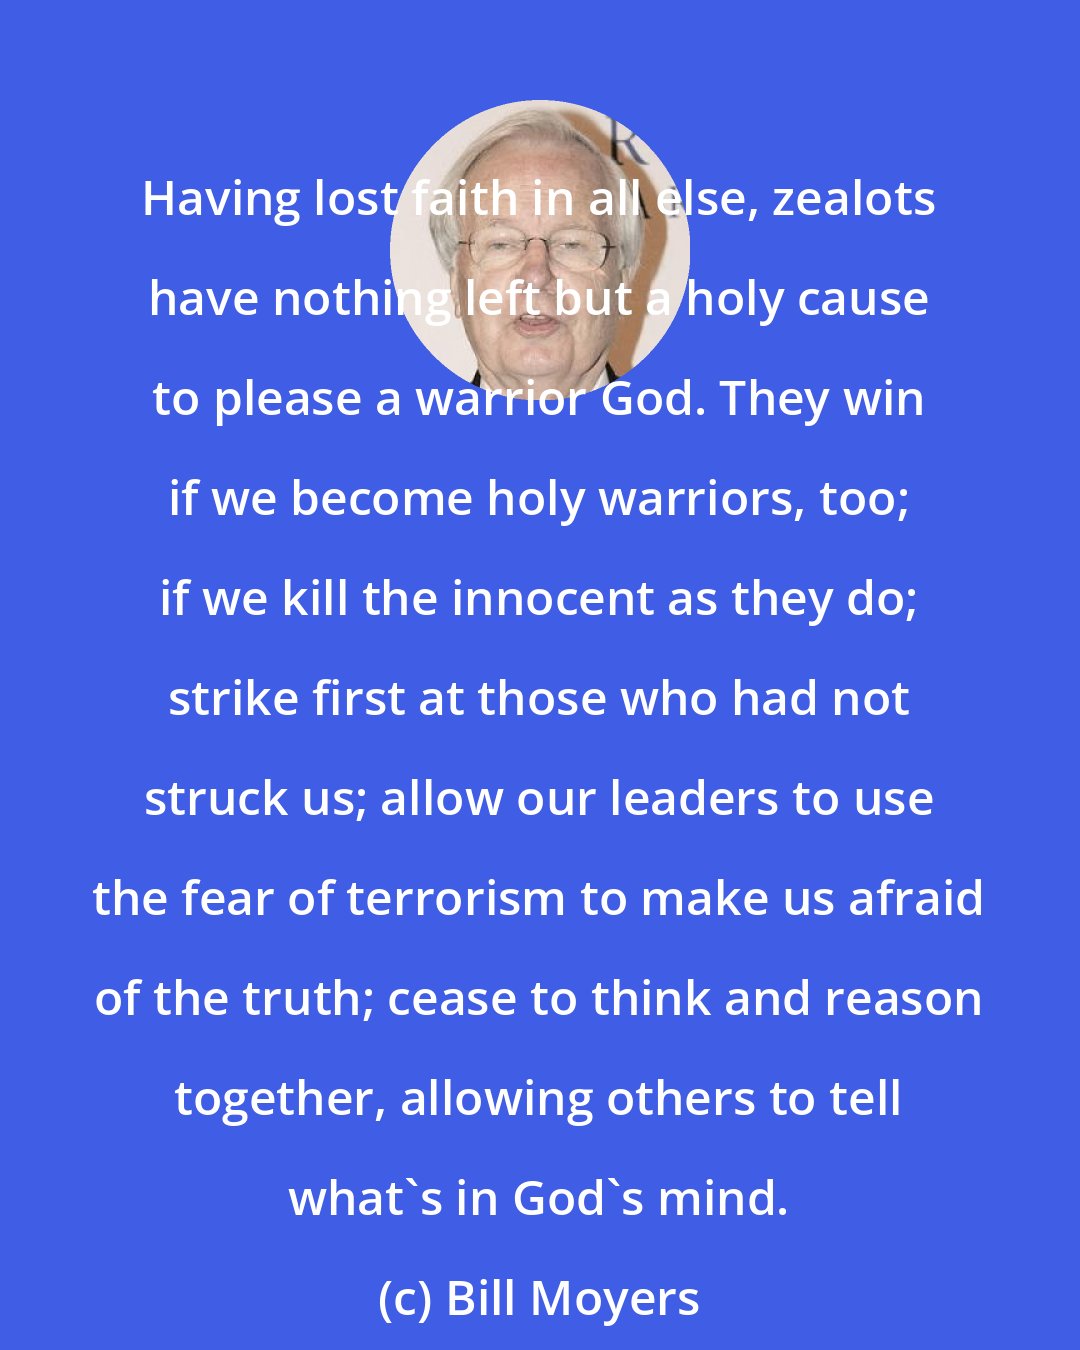 Bill Moyers: Having lost faith in all else, zealots have nothing left but a holy cause to please a warrior God. They win if we become holy warriors, too; if we kill the innocent as they do; strike first at those who had not struck us; allow our leaders to use the fear of terrorism to make us afraid of the truth; cease to think and reason together, allowing others to tell what's in God's mind.